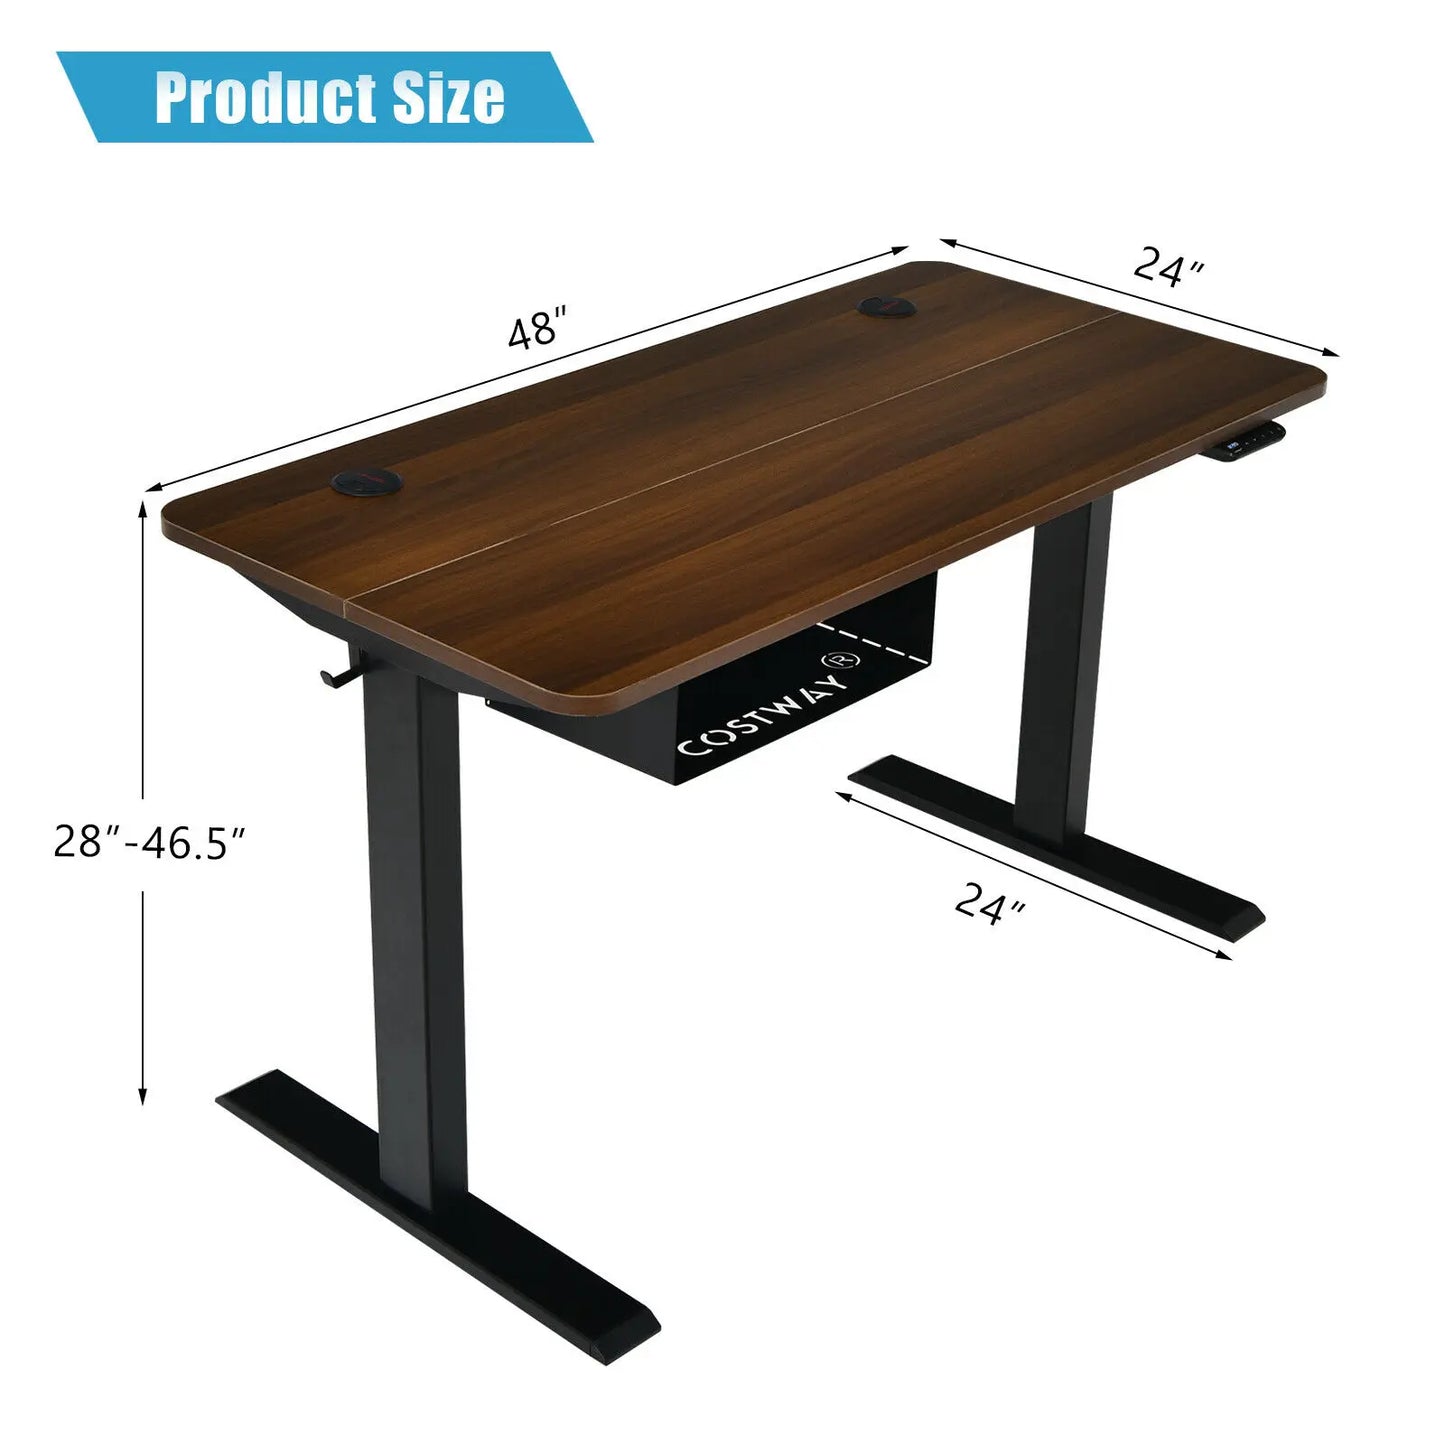 48" Electric Standing Desk Height Adjustable w/Control Panel & USB Port